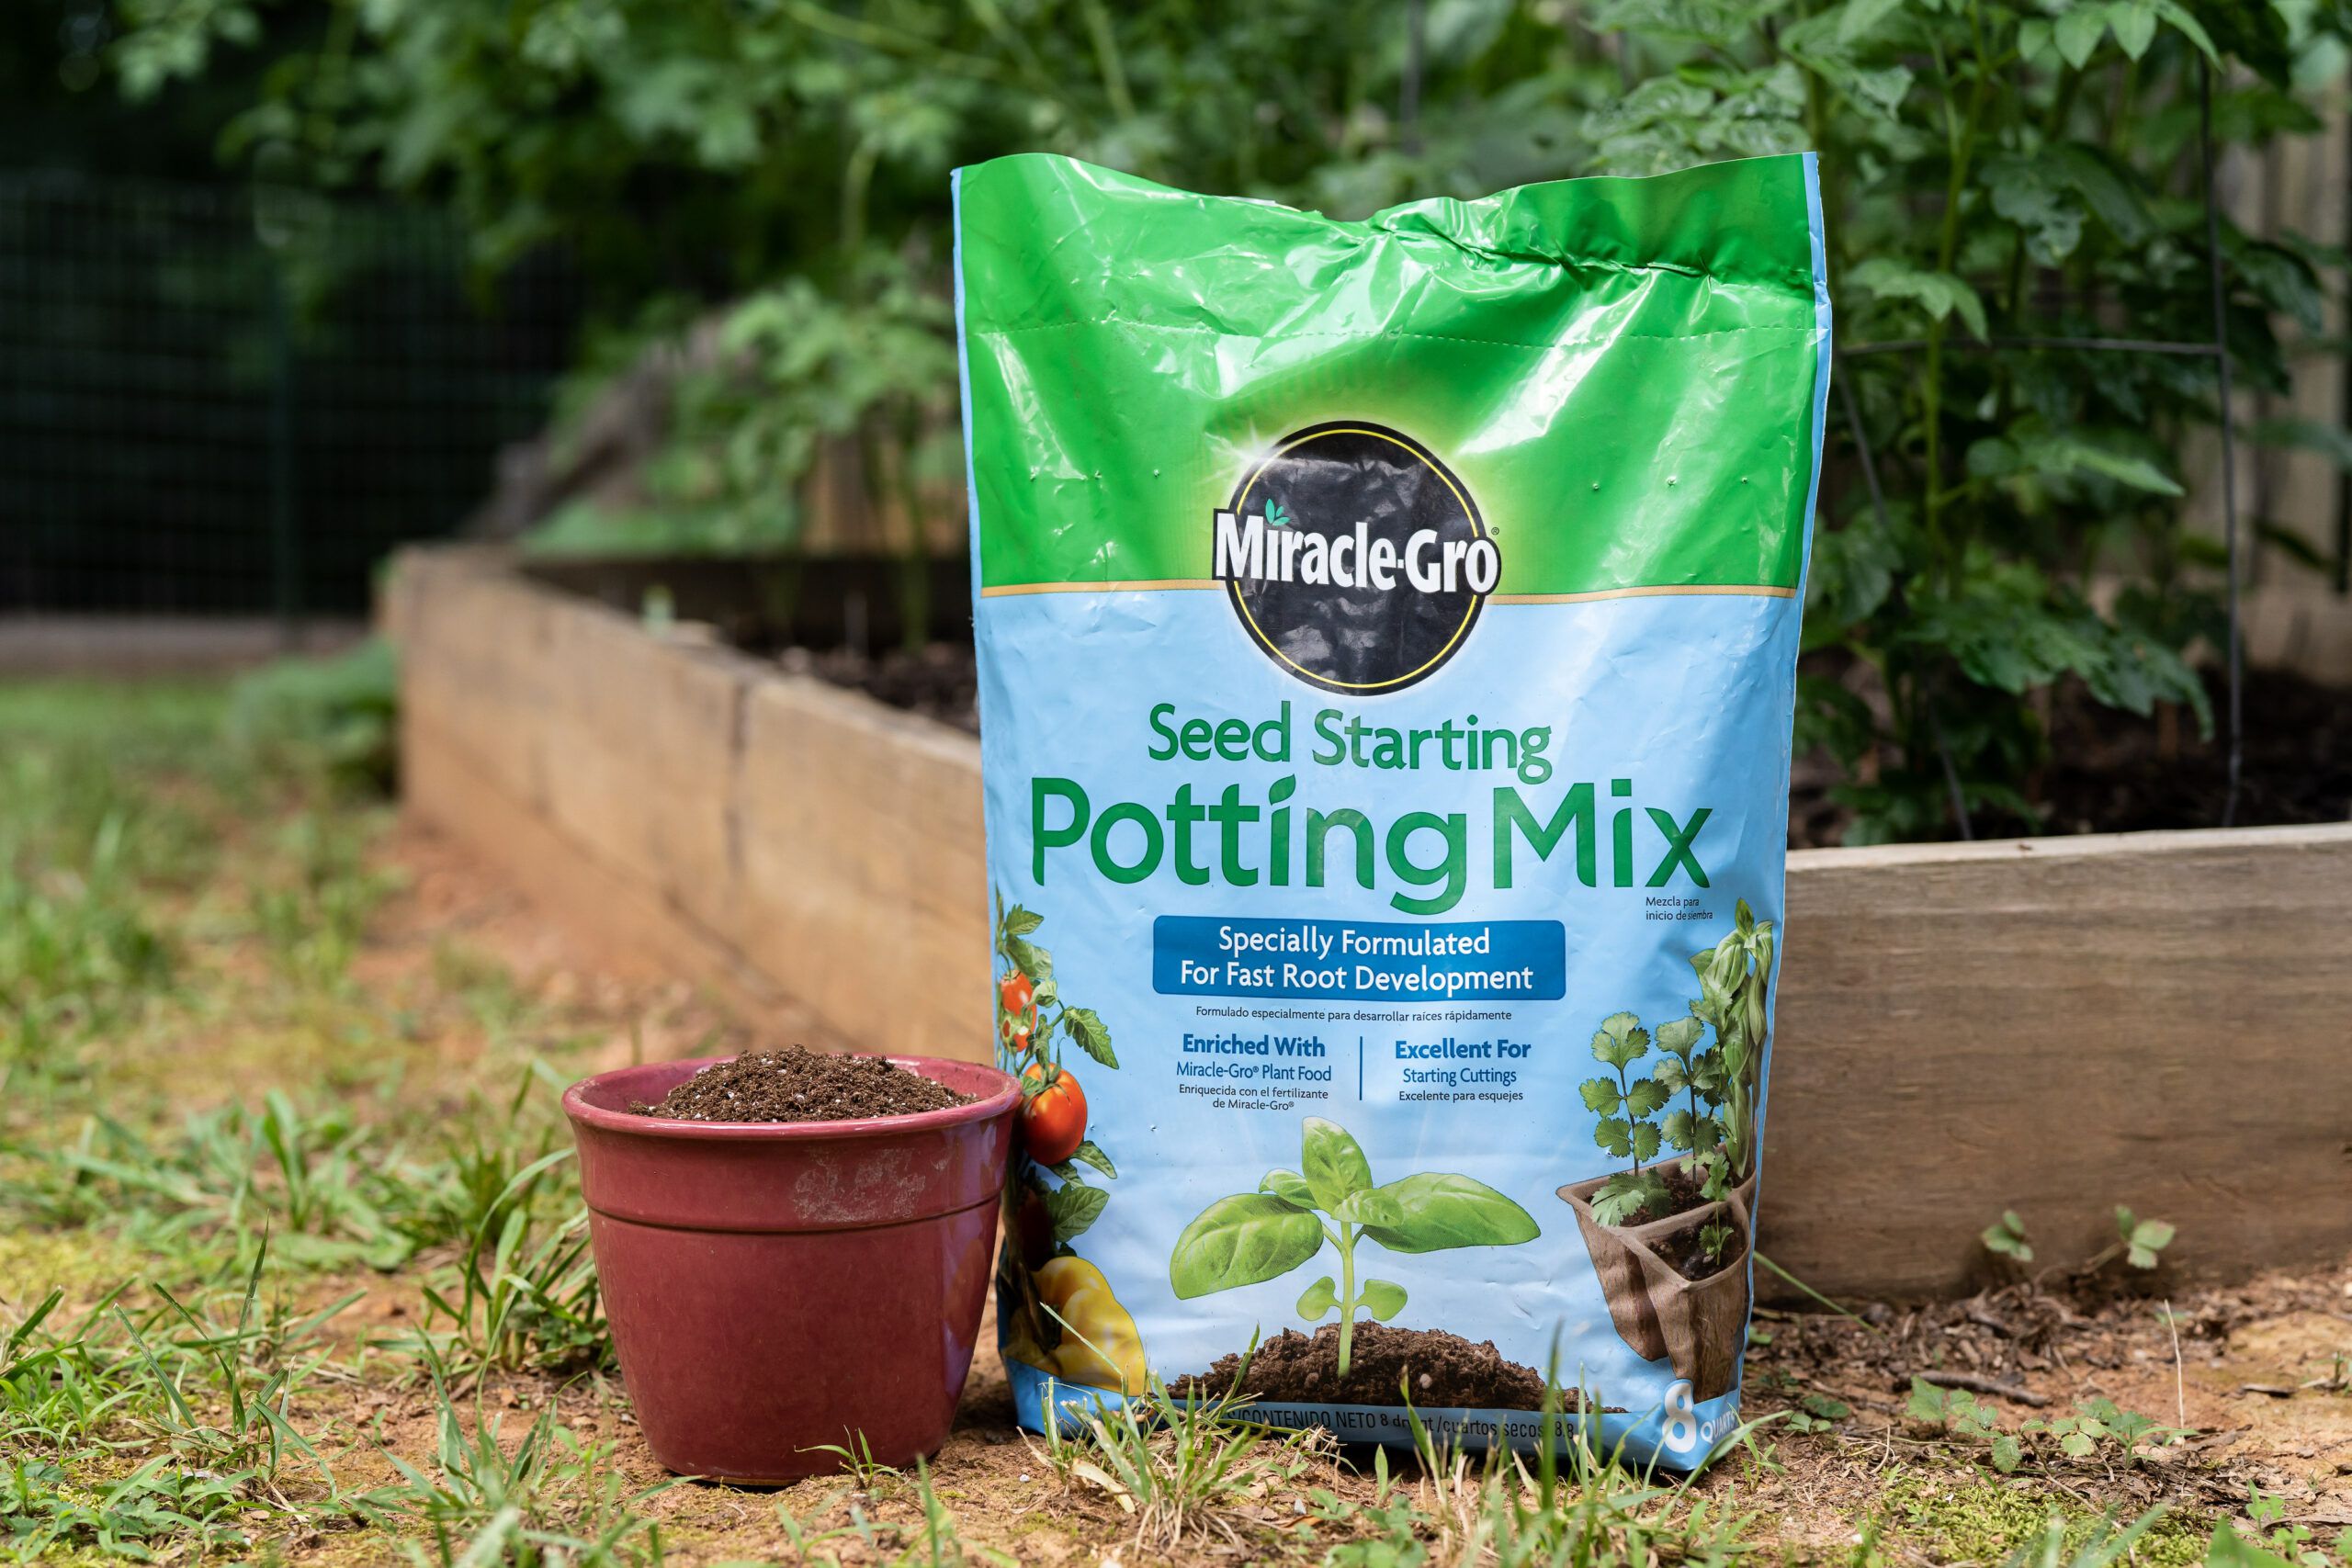 How to make a potting mix for herbs